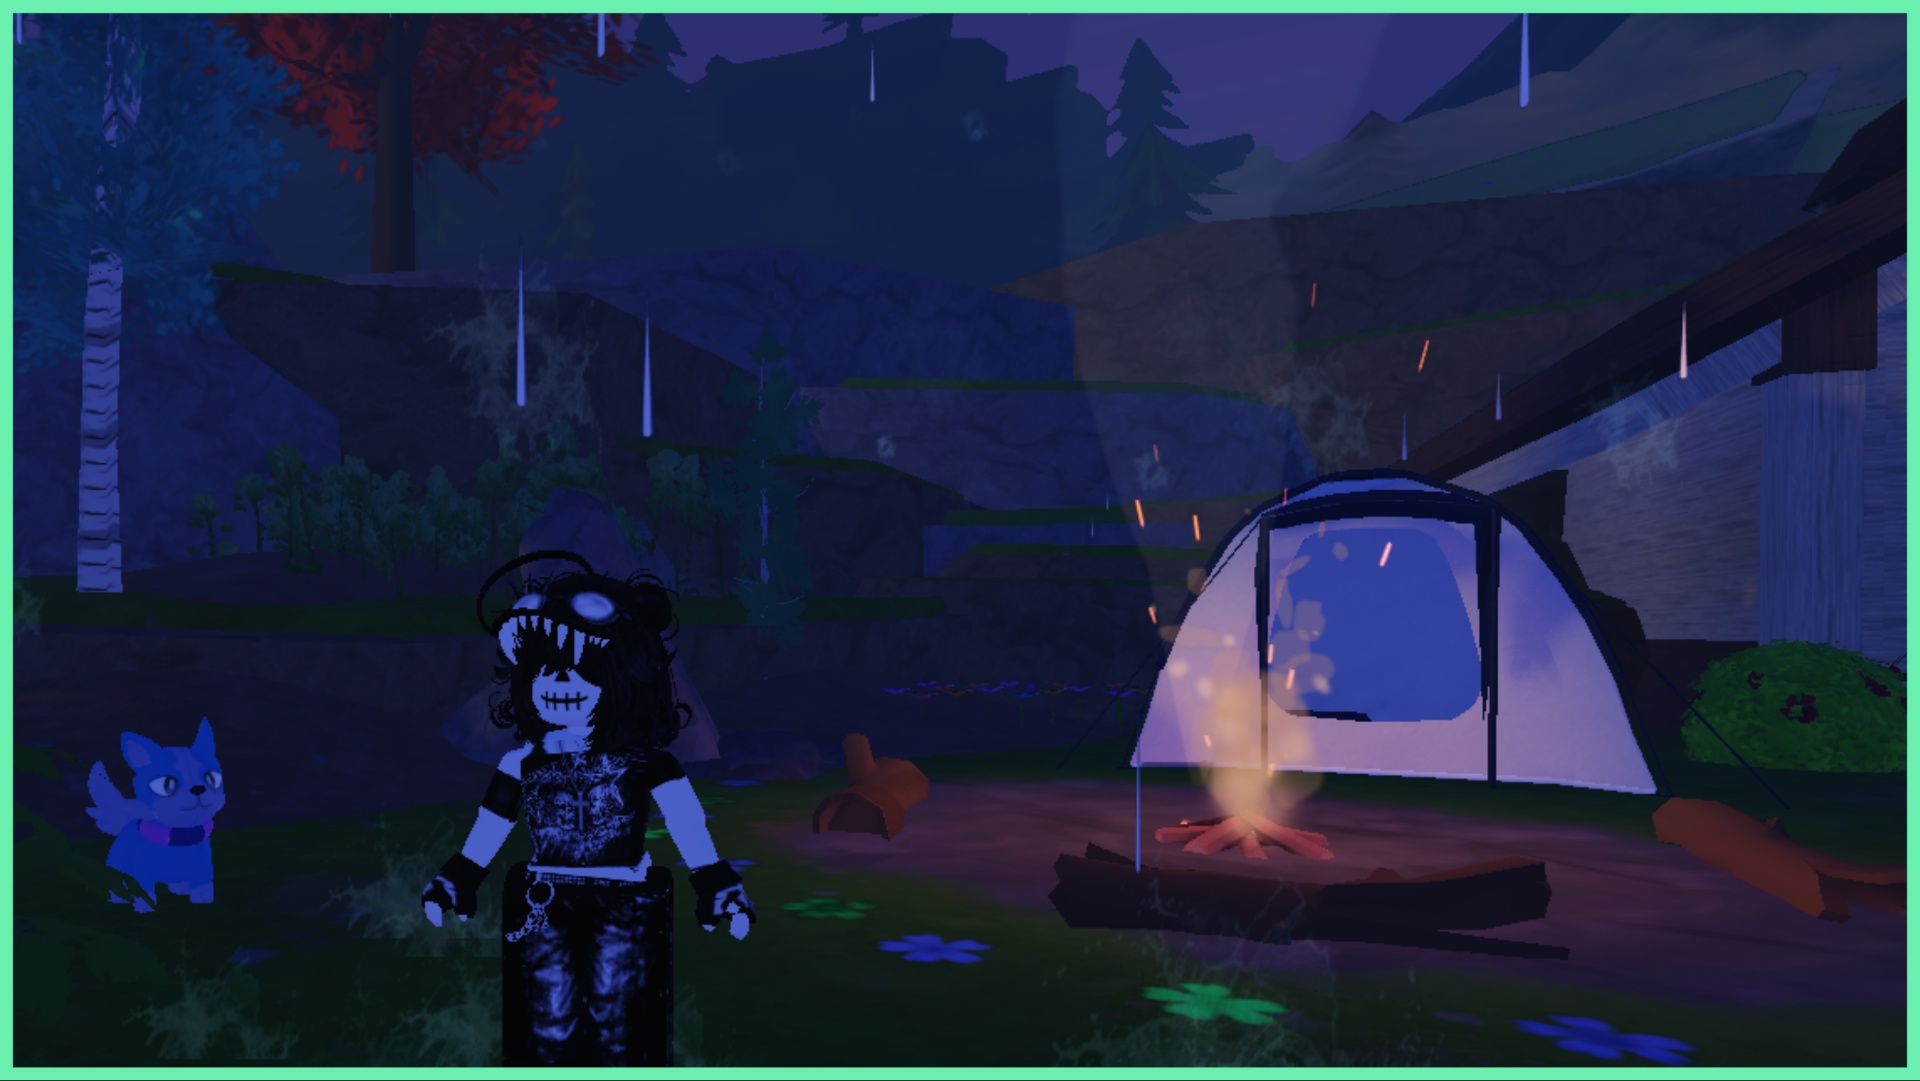 The image shows my avatar stood in front of a tent at night during rainfall with a campfire burning away behind her. Her tanorian is to the left of the screen watching her playfully